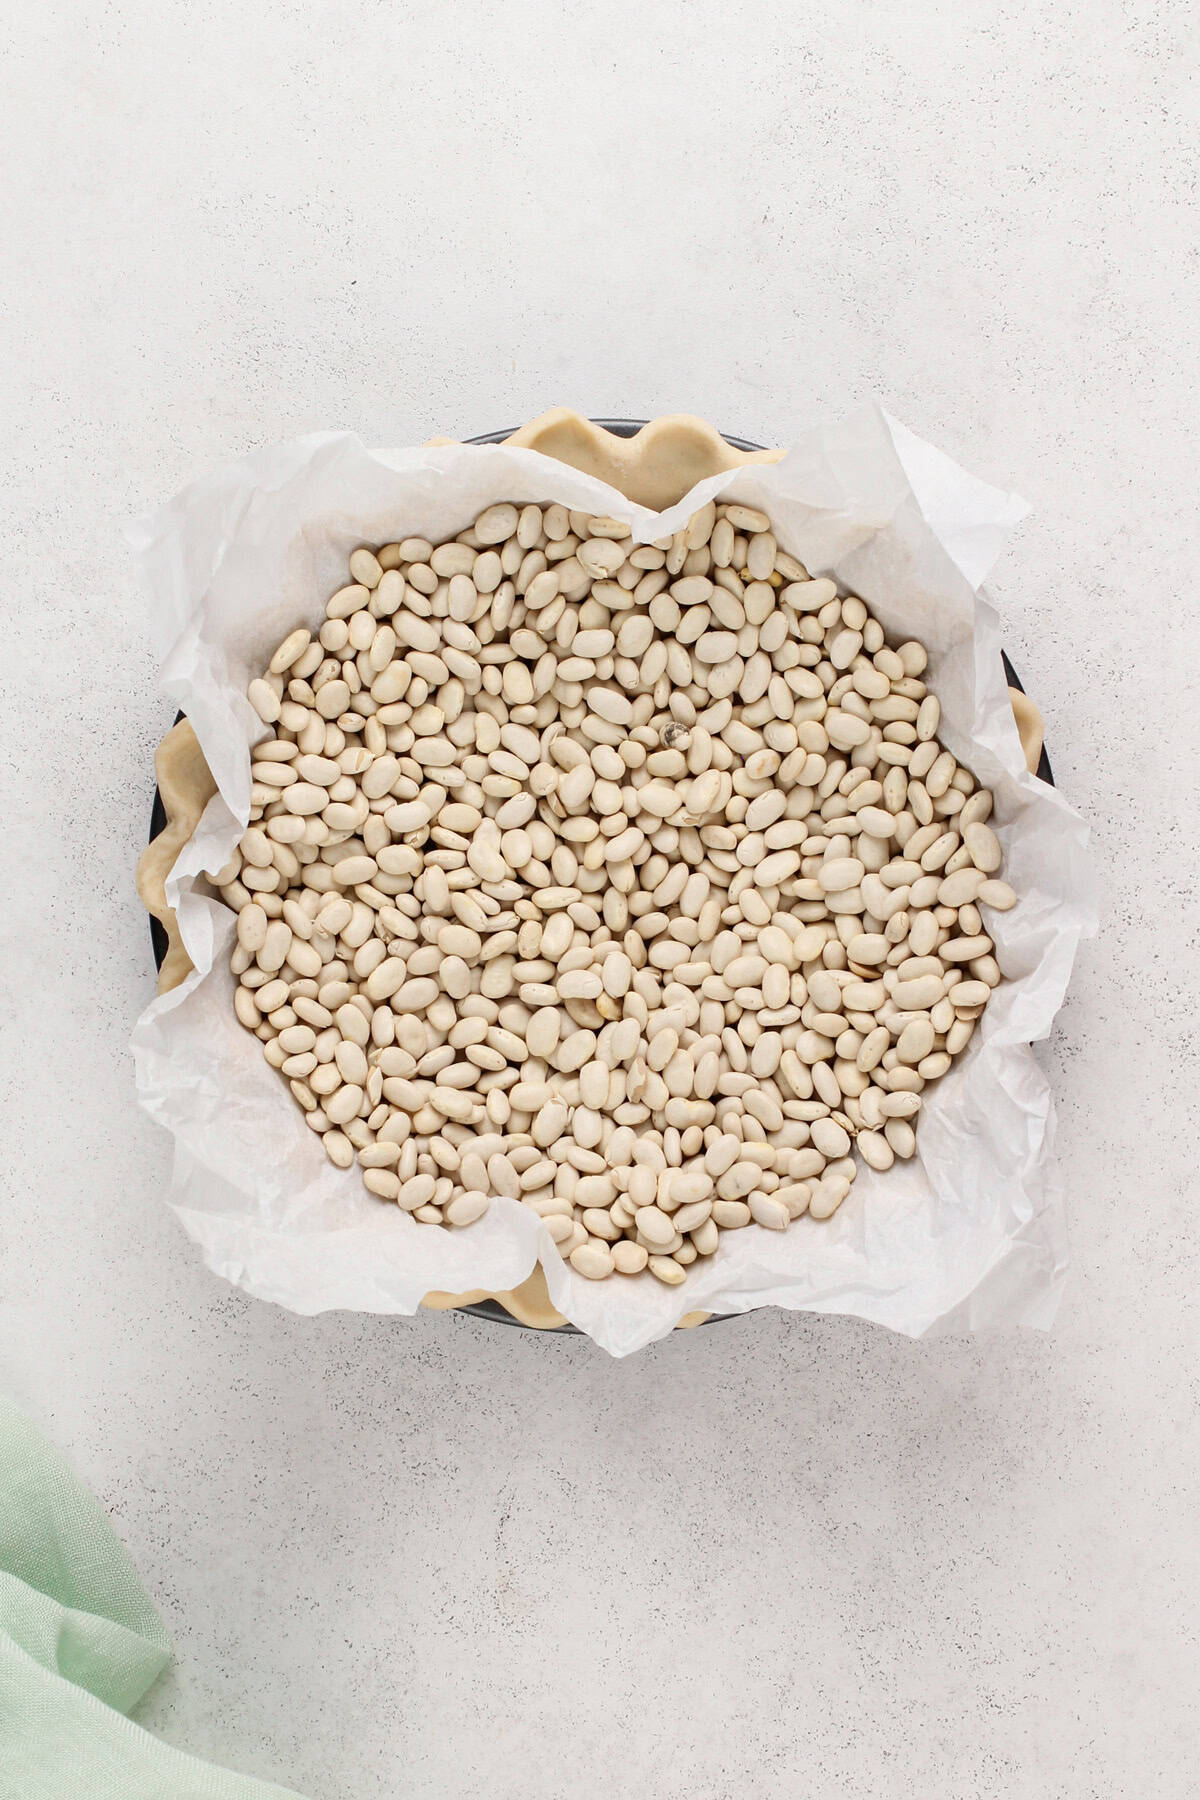 Dried beans in a parchment-lined pie crust.